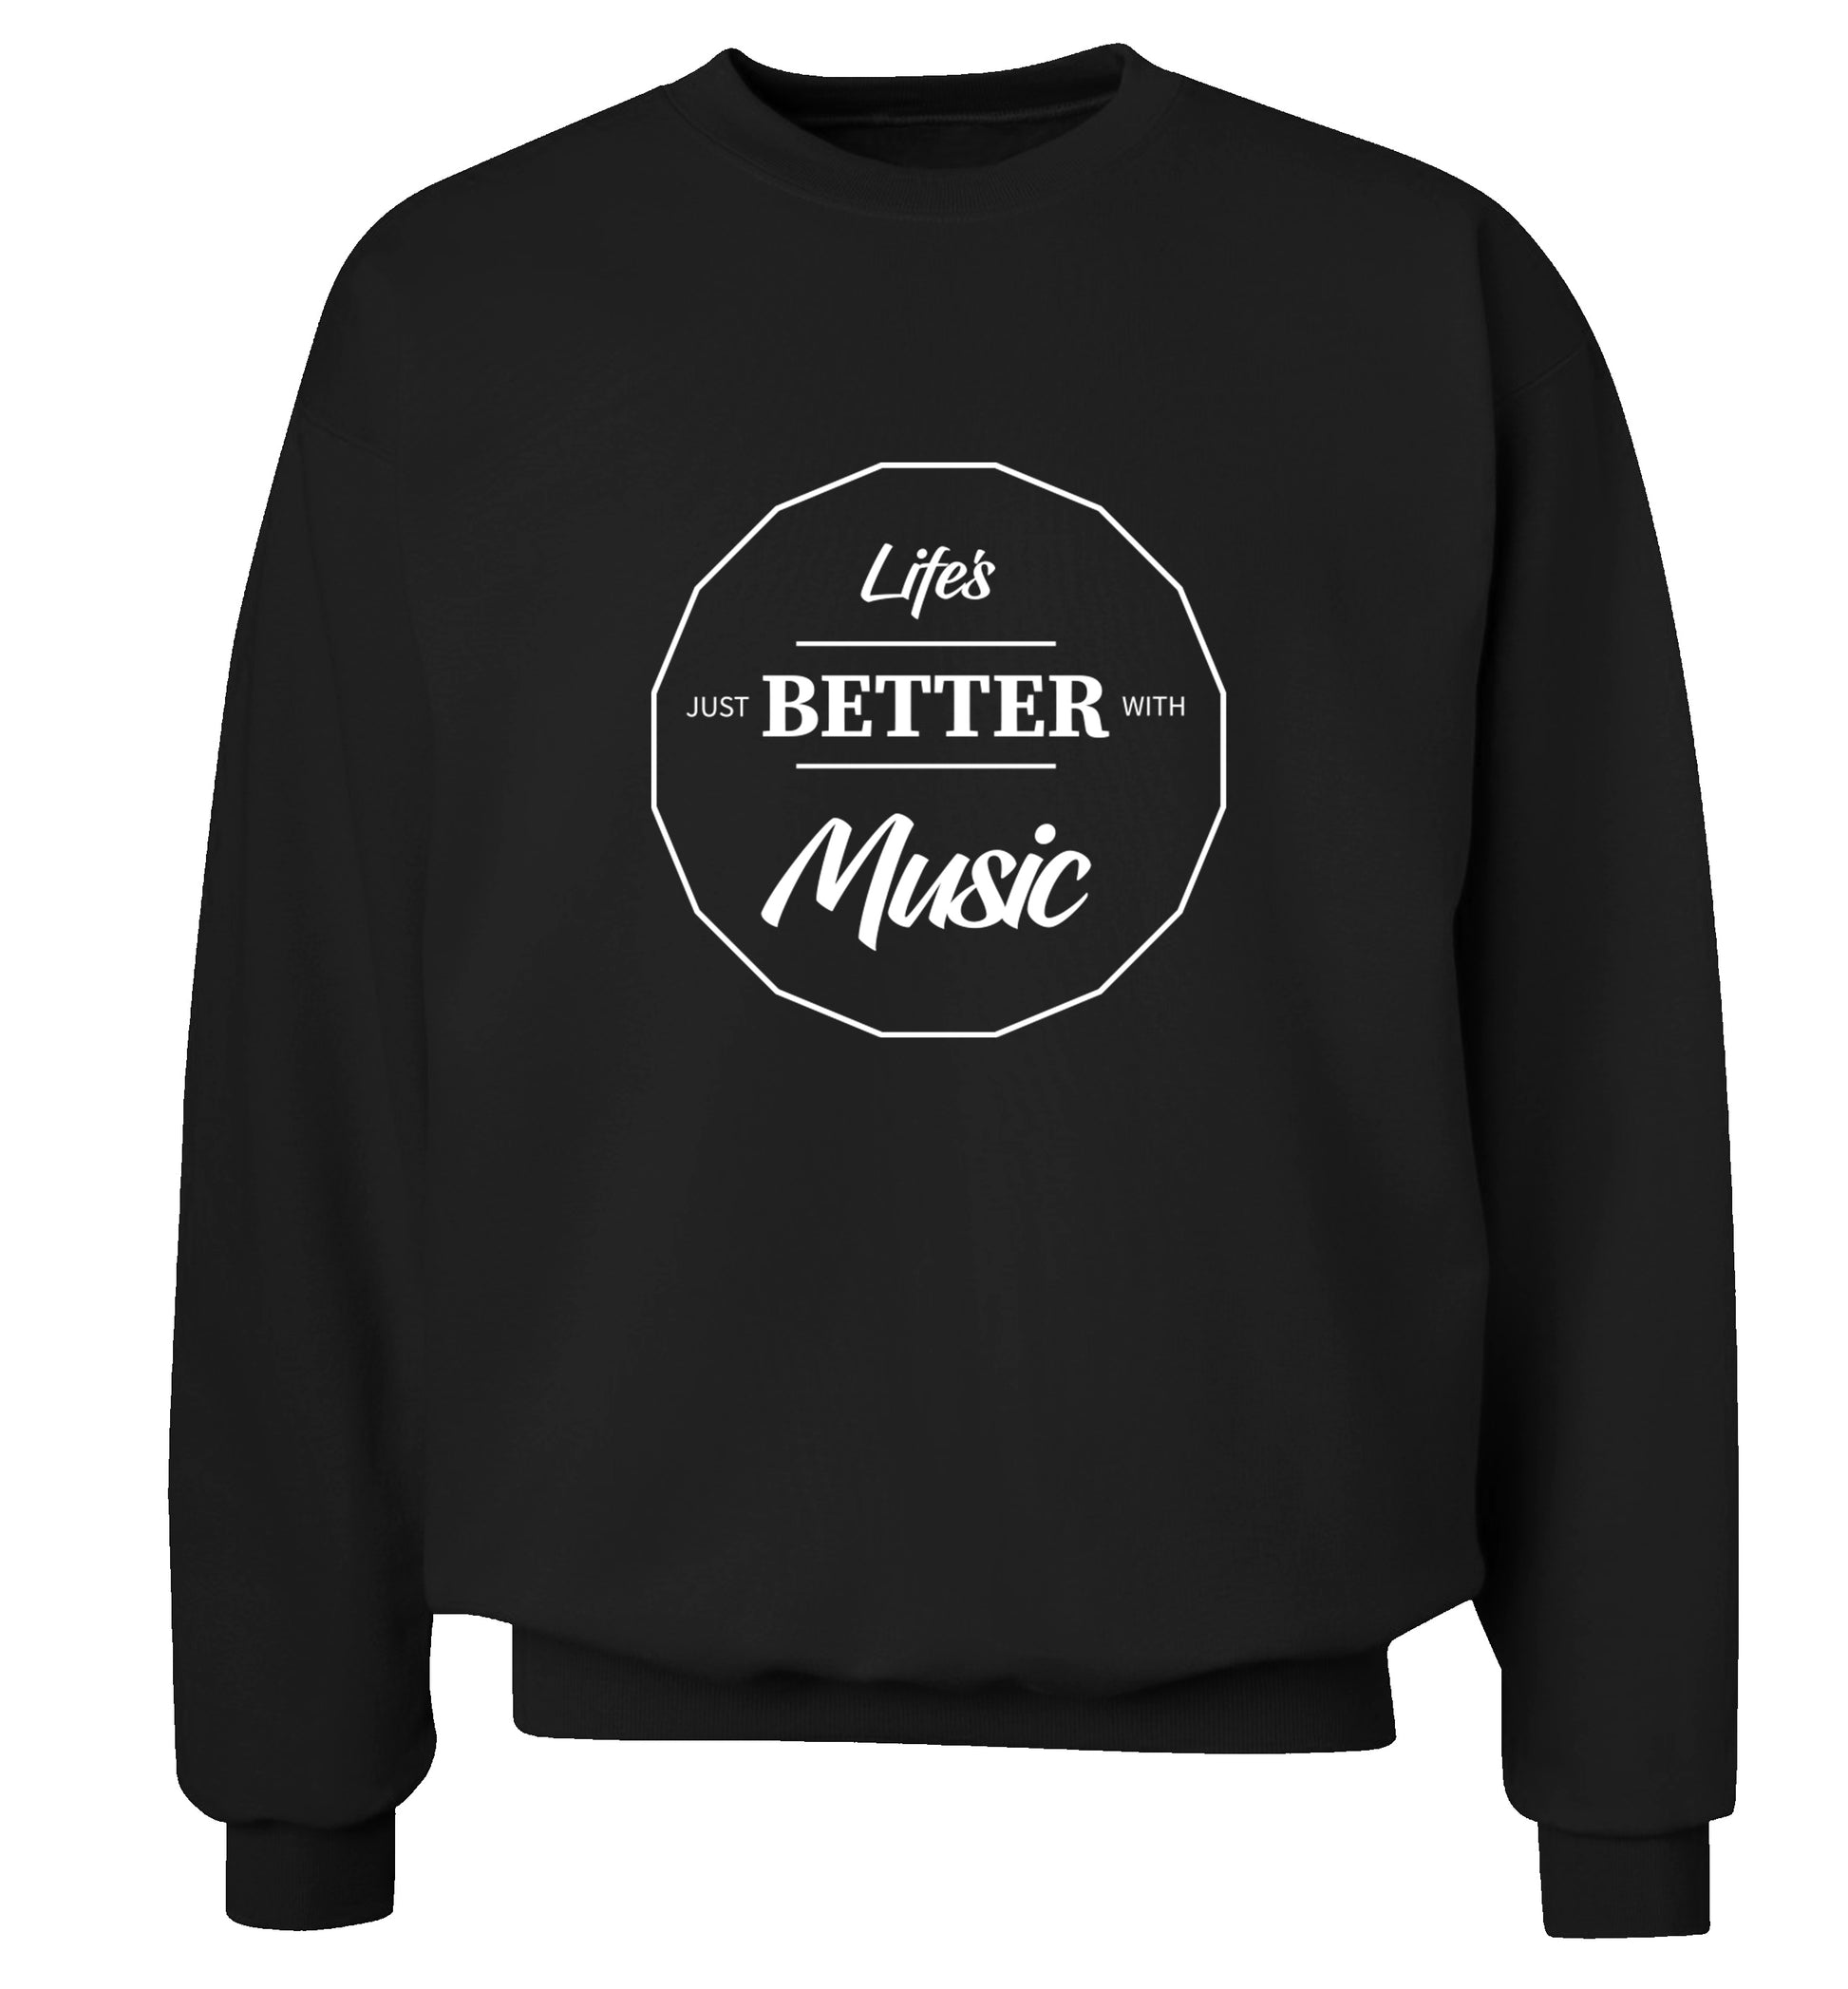 Life is Better With Music Adult's unisex black Sweater 2XL